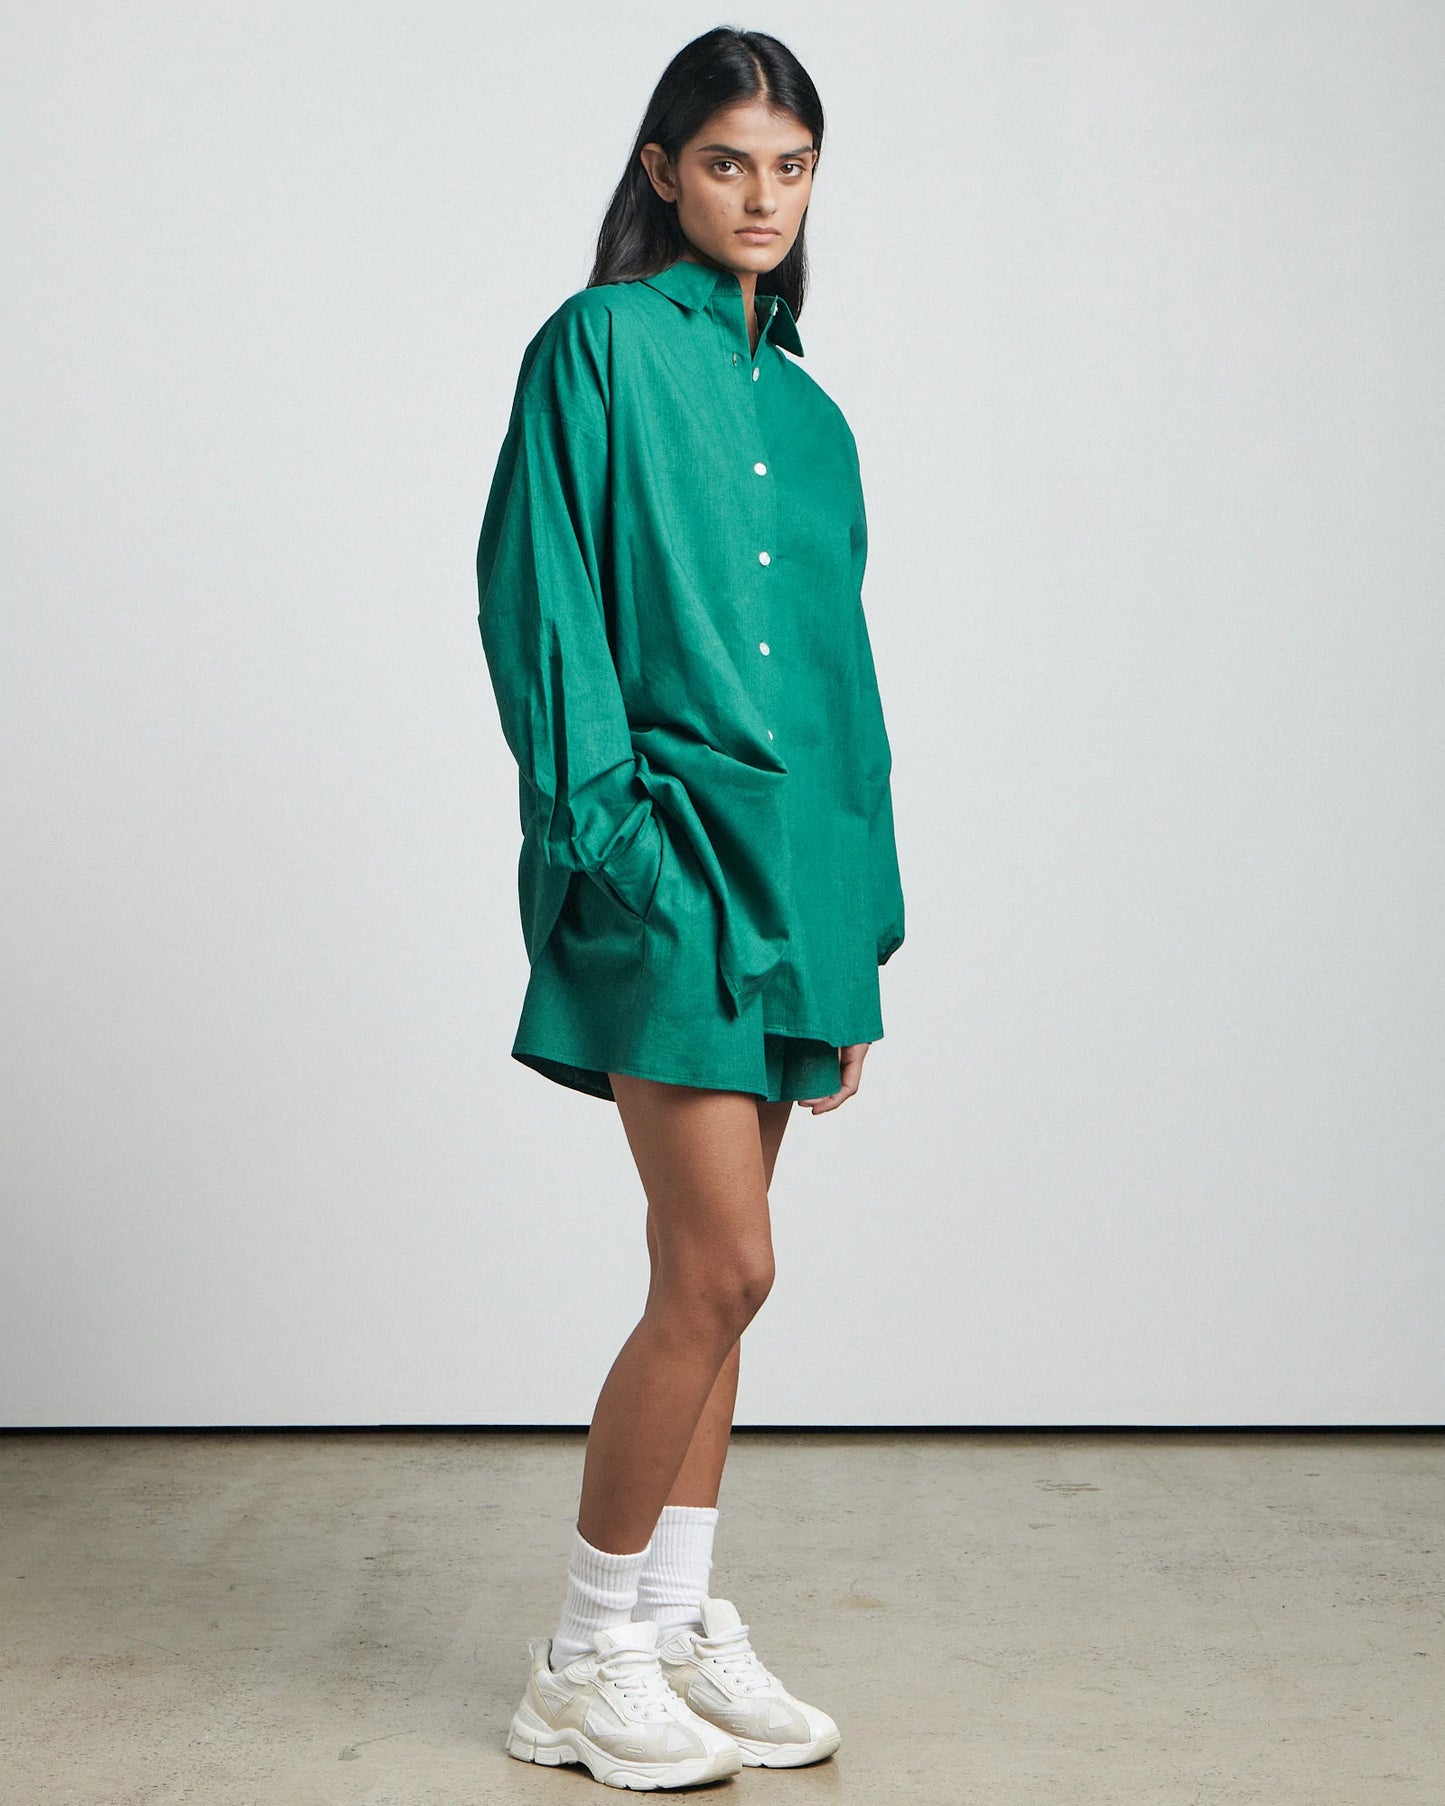 CHARLIE HOLIDAY BARE // The Long Sleeve Shirt PALM LEAF GREEN